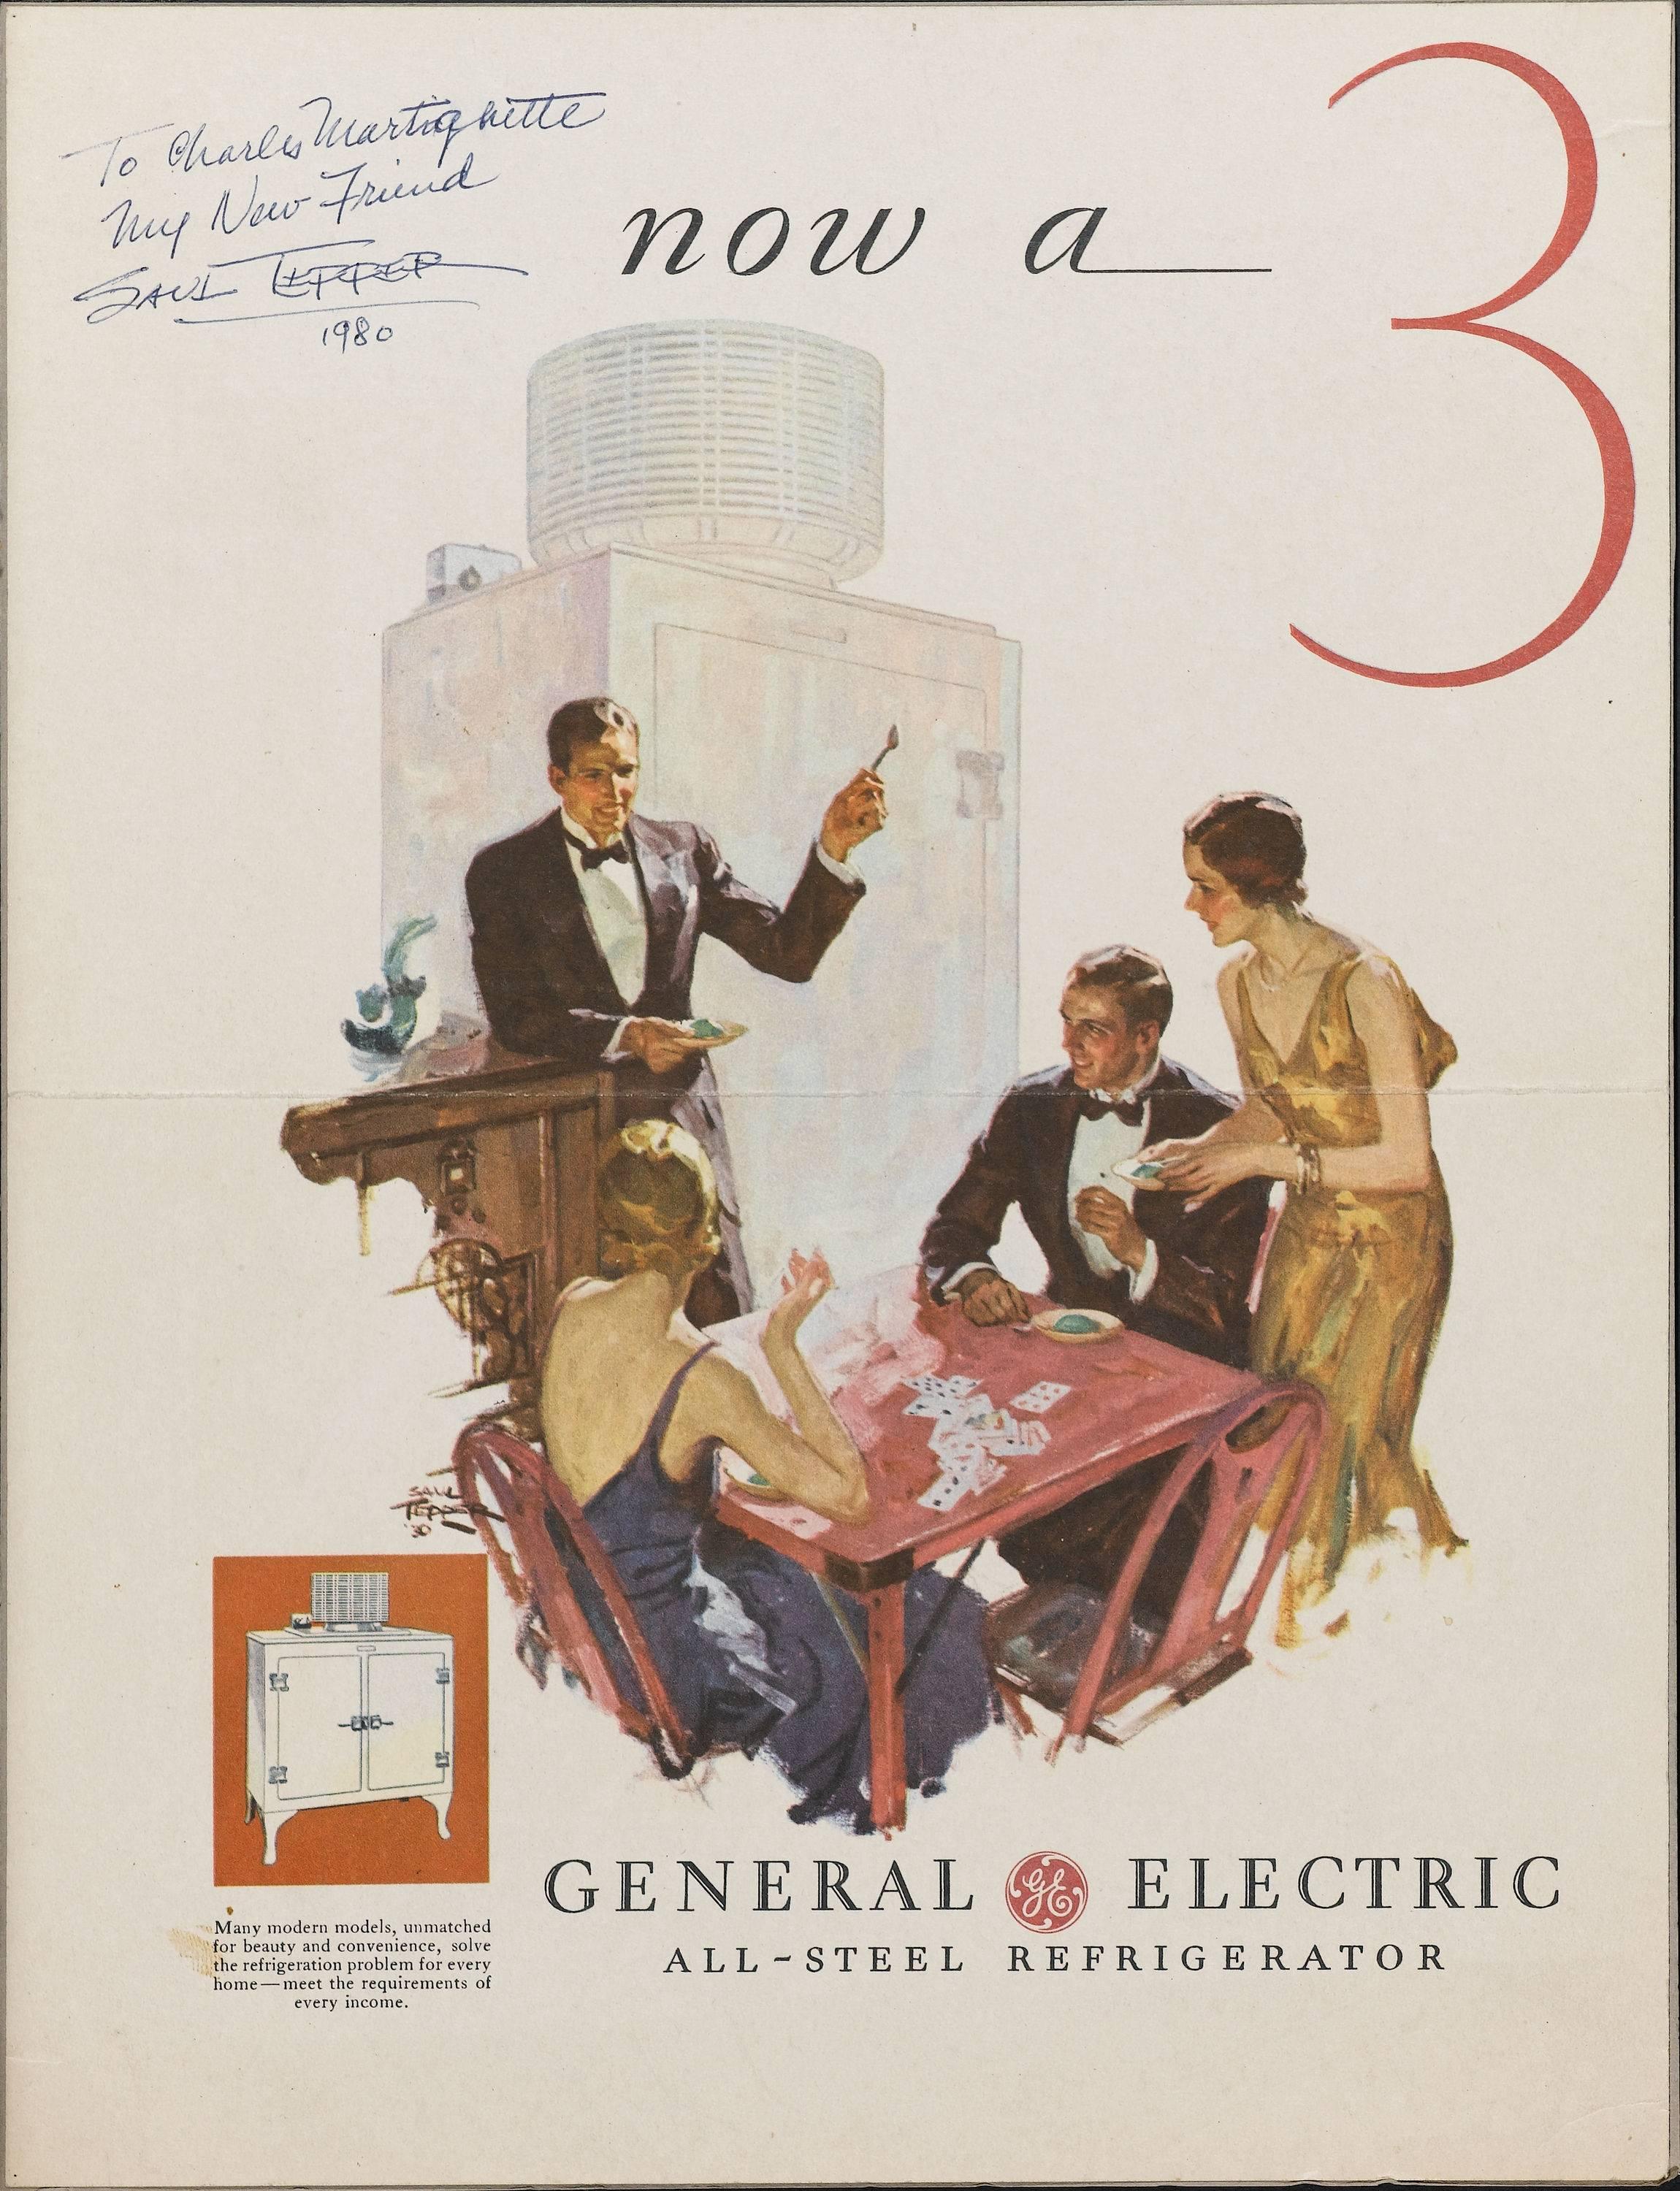 Now a 3, General Electric All-Steel Refrigerator Ad Illustration - Painting by Saul Tepper